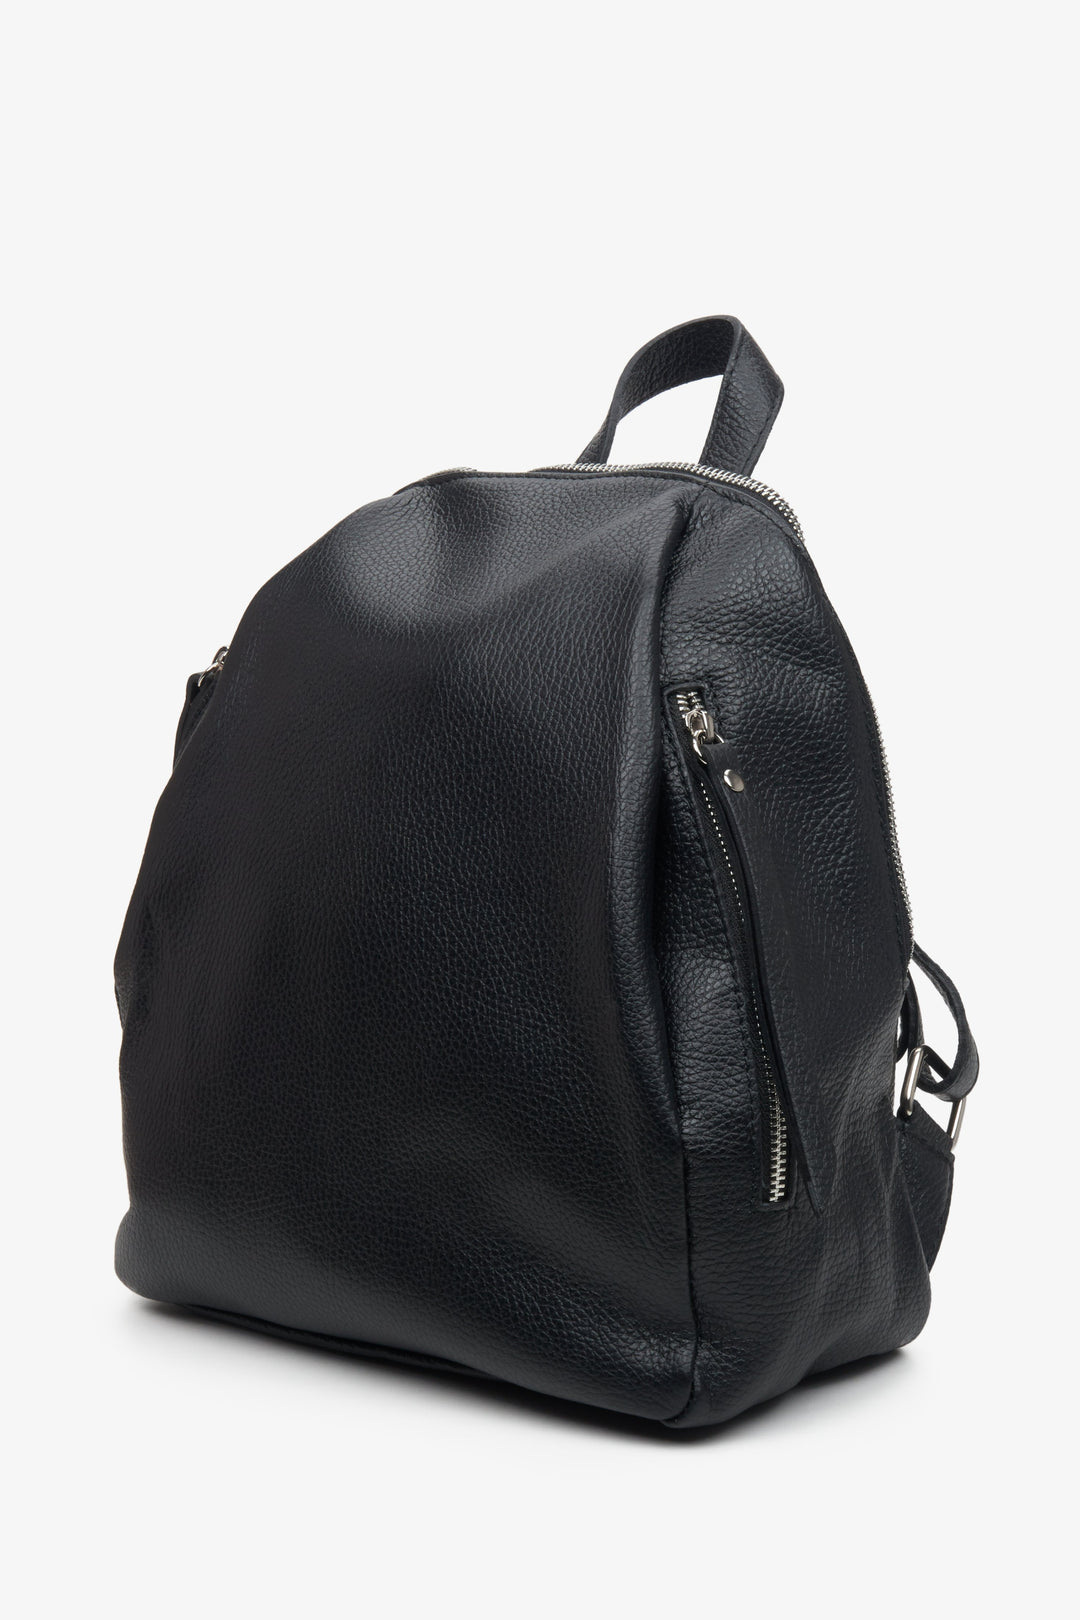 Women's Black Leather Backpack with Silver Accents Estro ER00113408.